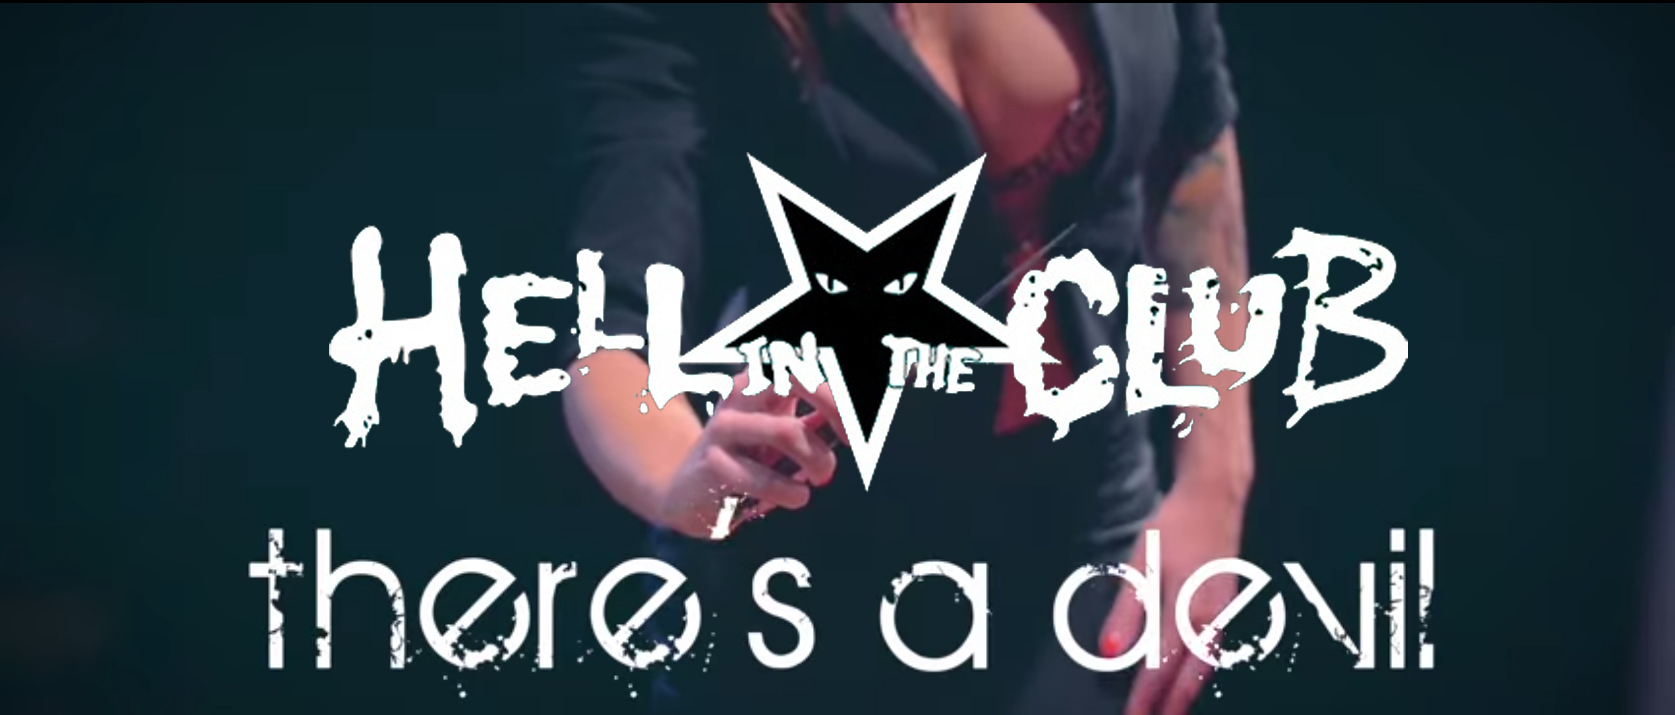 hell in the club video